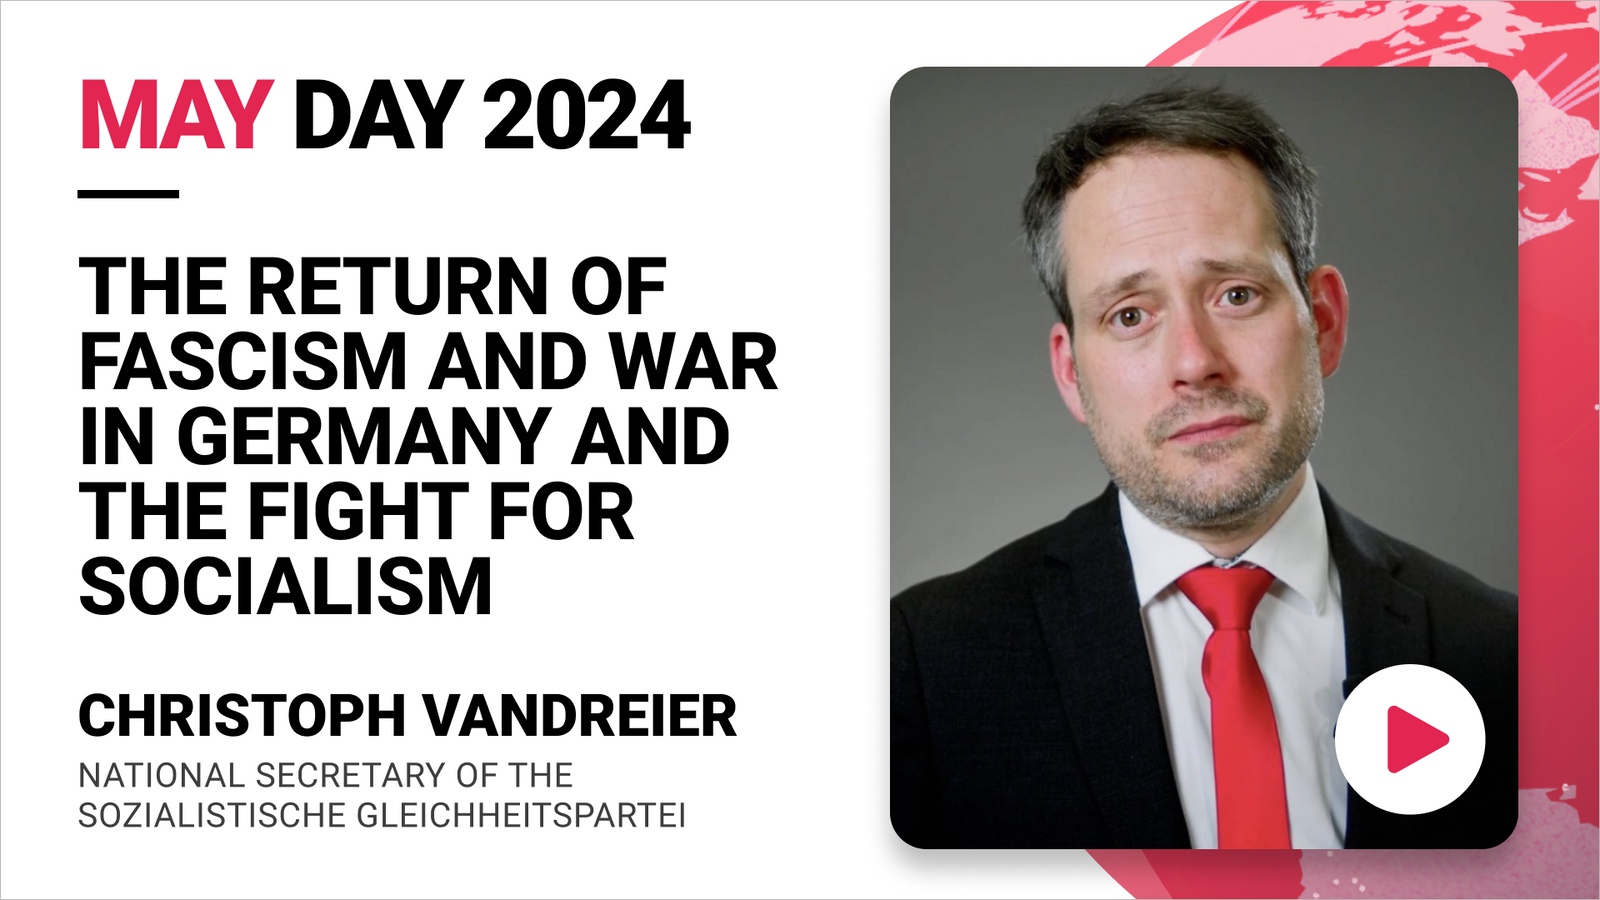 The return of fascism and war in Germany and the fight for socialism